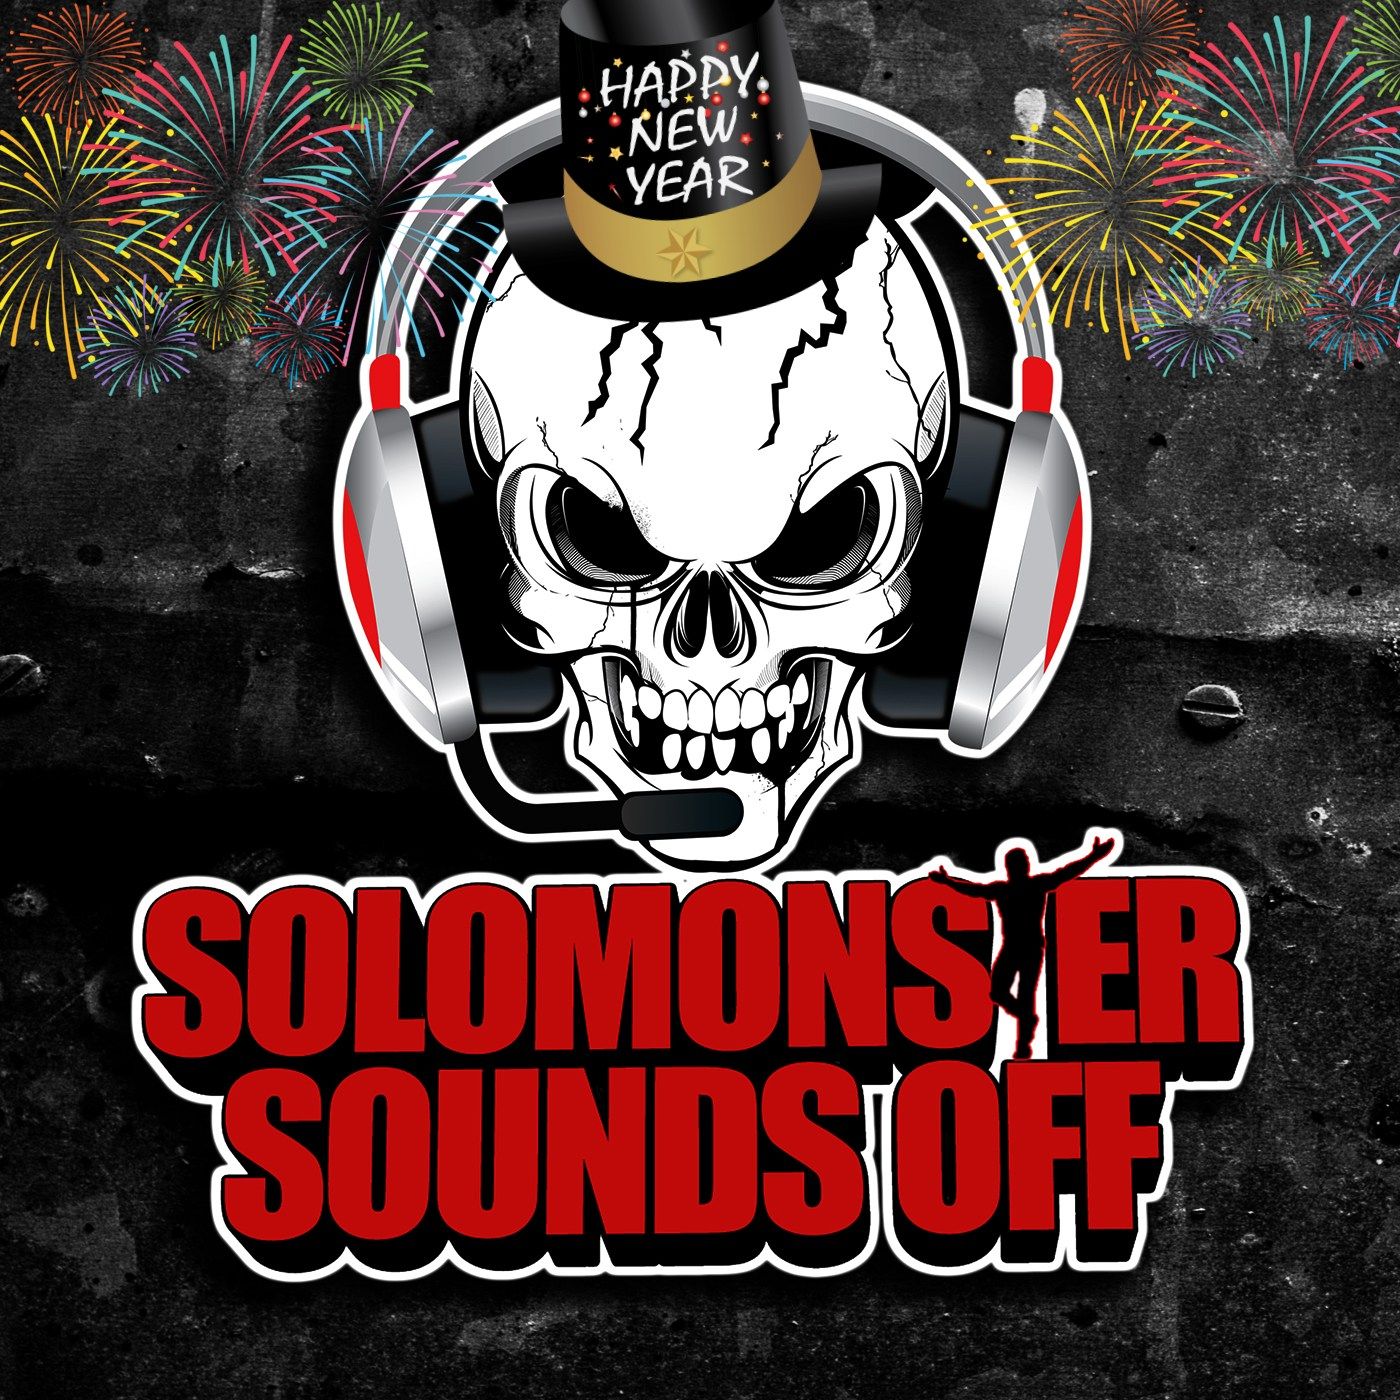 Sound Off 841 - LIVE NEW YEAR’S COUNTDOWN WITH JERICHO DRAMA AND PREDICTIONS FOR 2024!